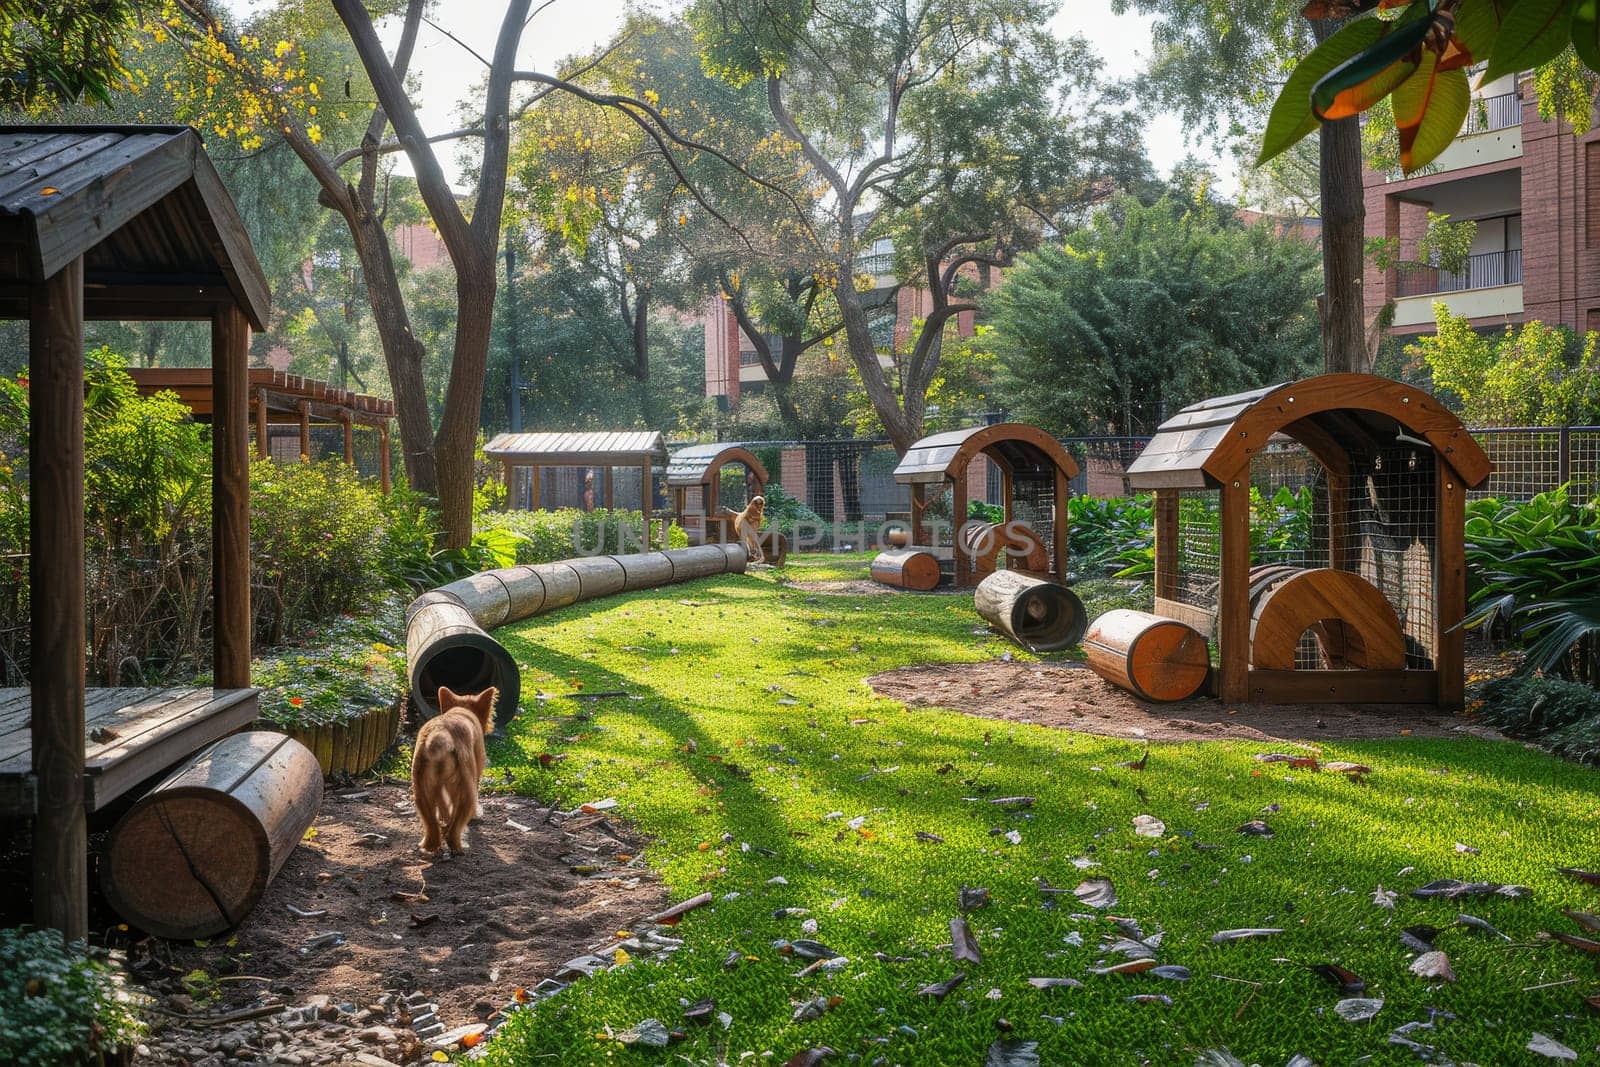 A dog park with a wooden gazebo and a tree with a large banana leaf by itchaznong